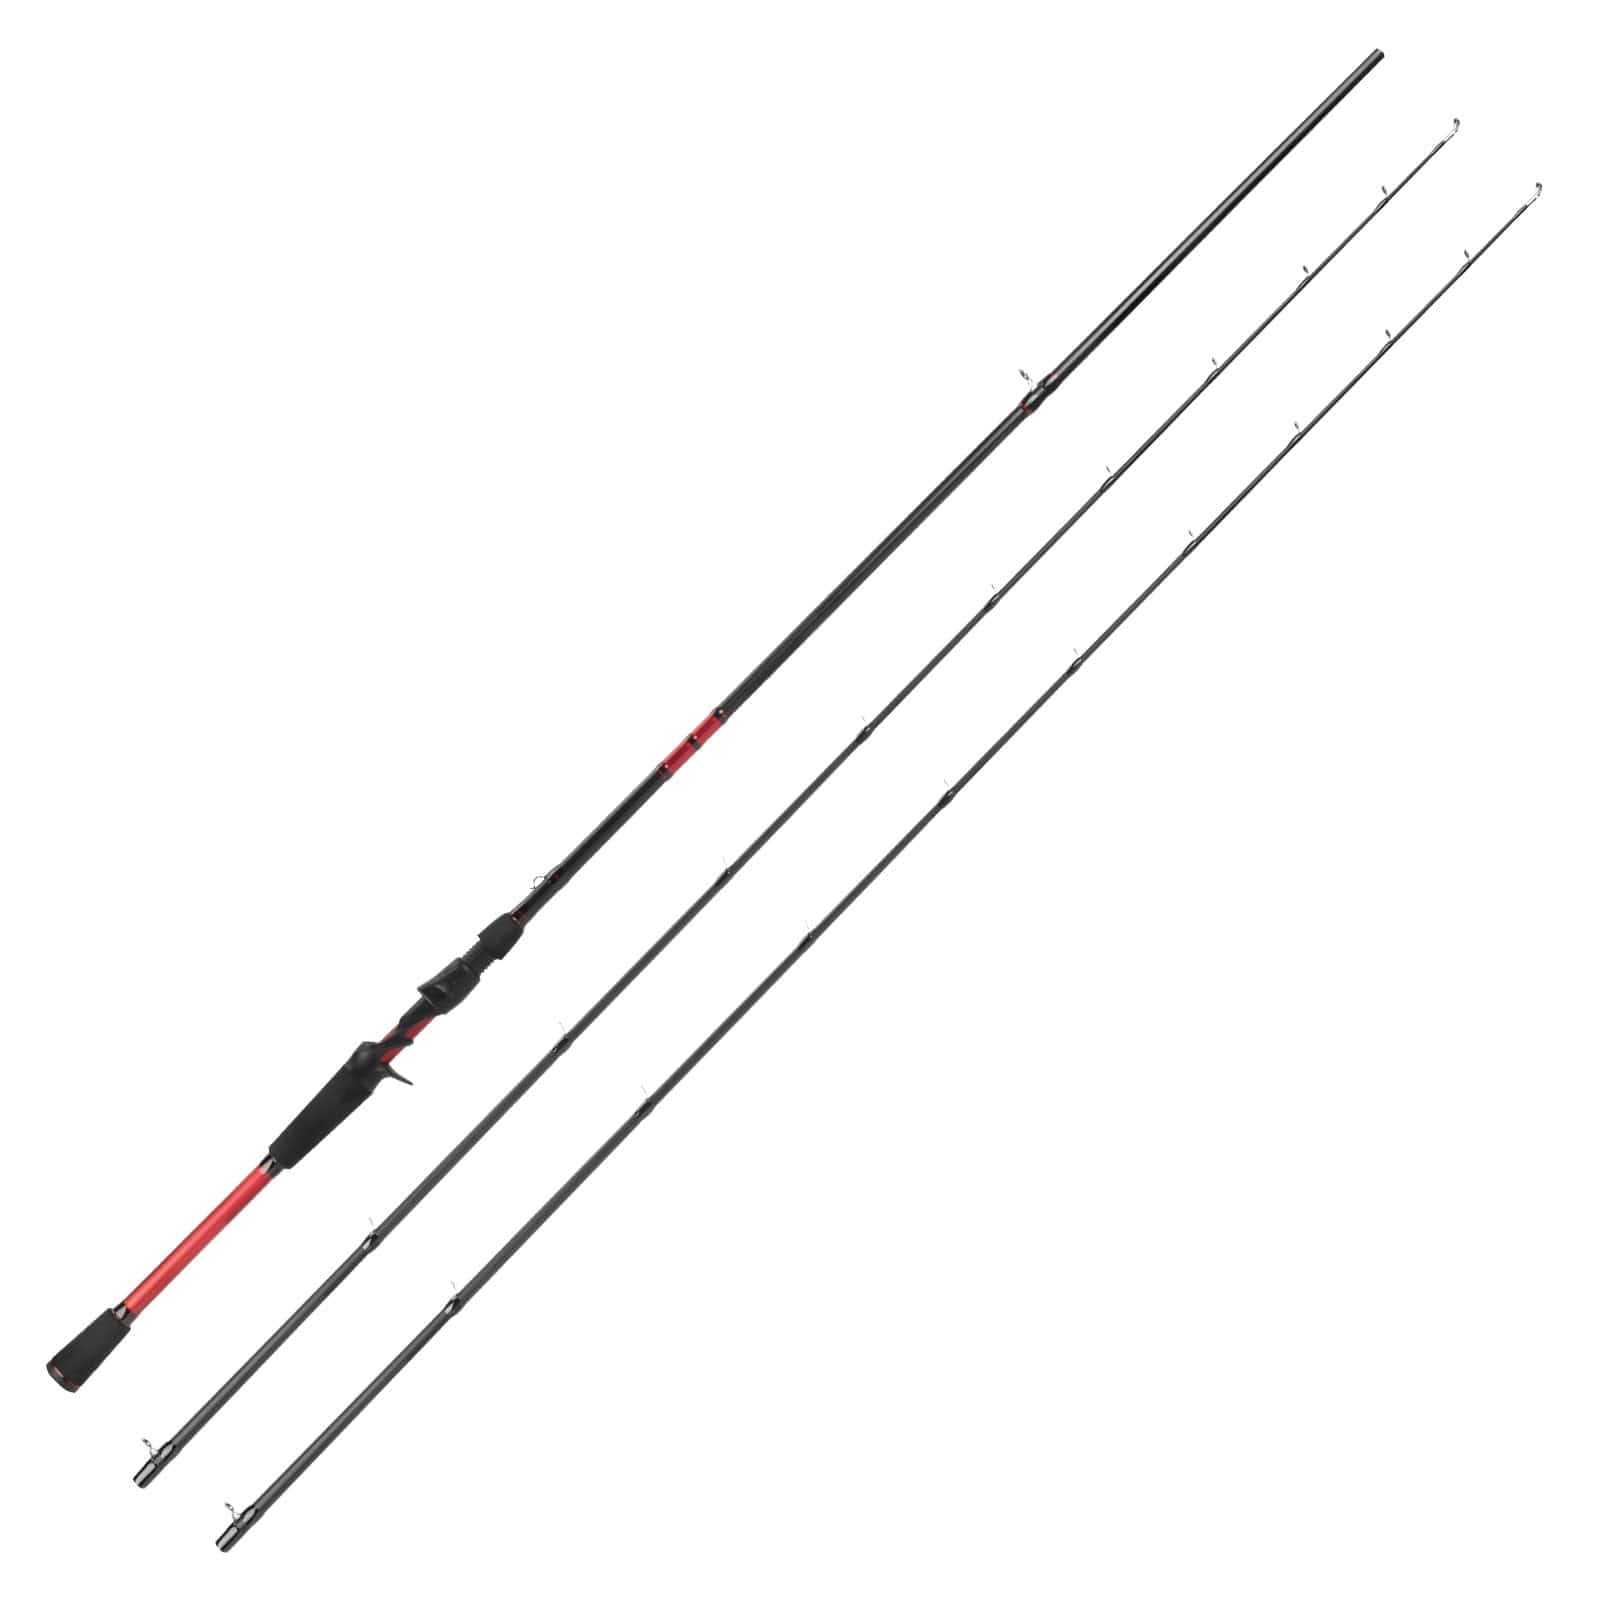 Buy KastKing Royale Advantage Fishing Rod Spinning Rod Casting Rod IM6  Graphite Blanks 2 Pieces Rods with Extra Tip SectionKastFlex Technology  Power Transition System EVA Handle 17 Lengths and Actions at Ubuy Pakistan